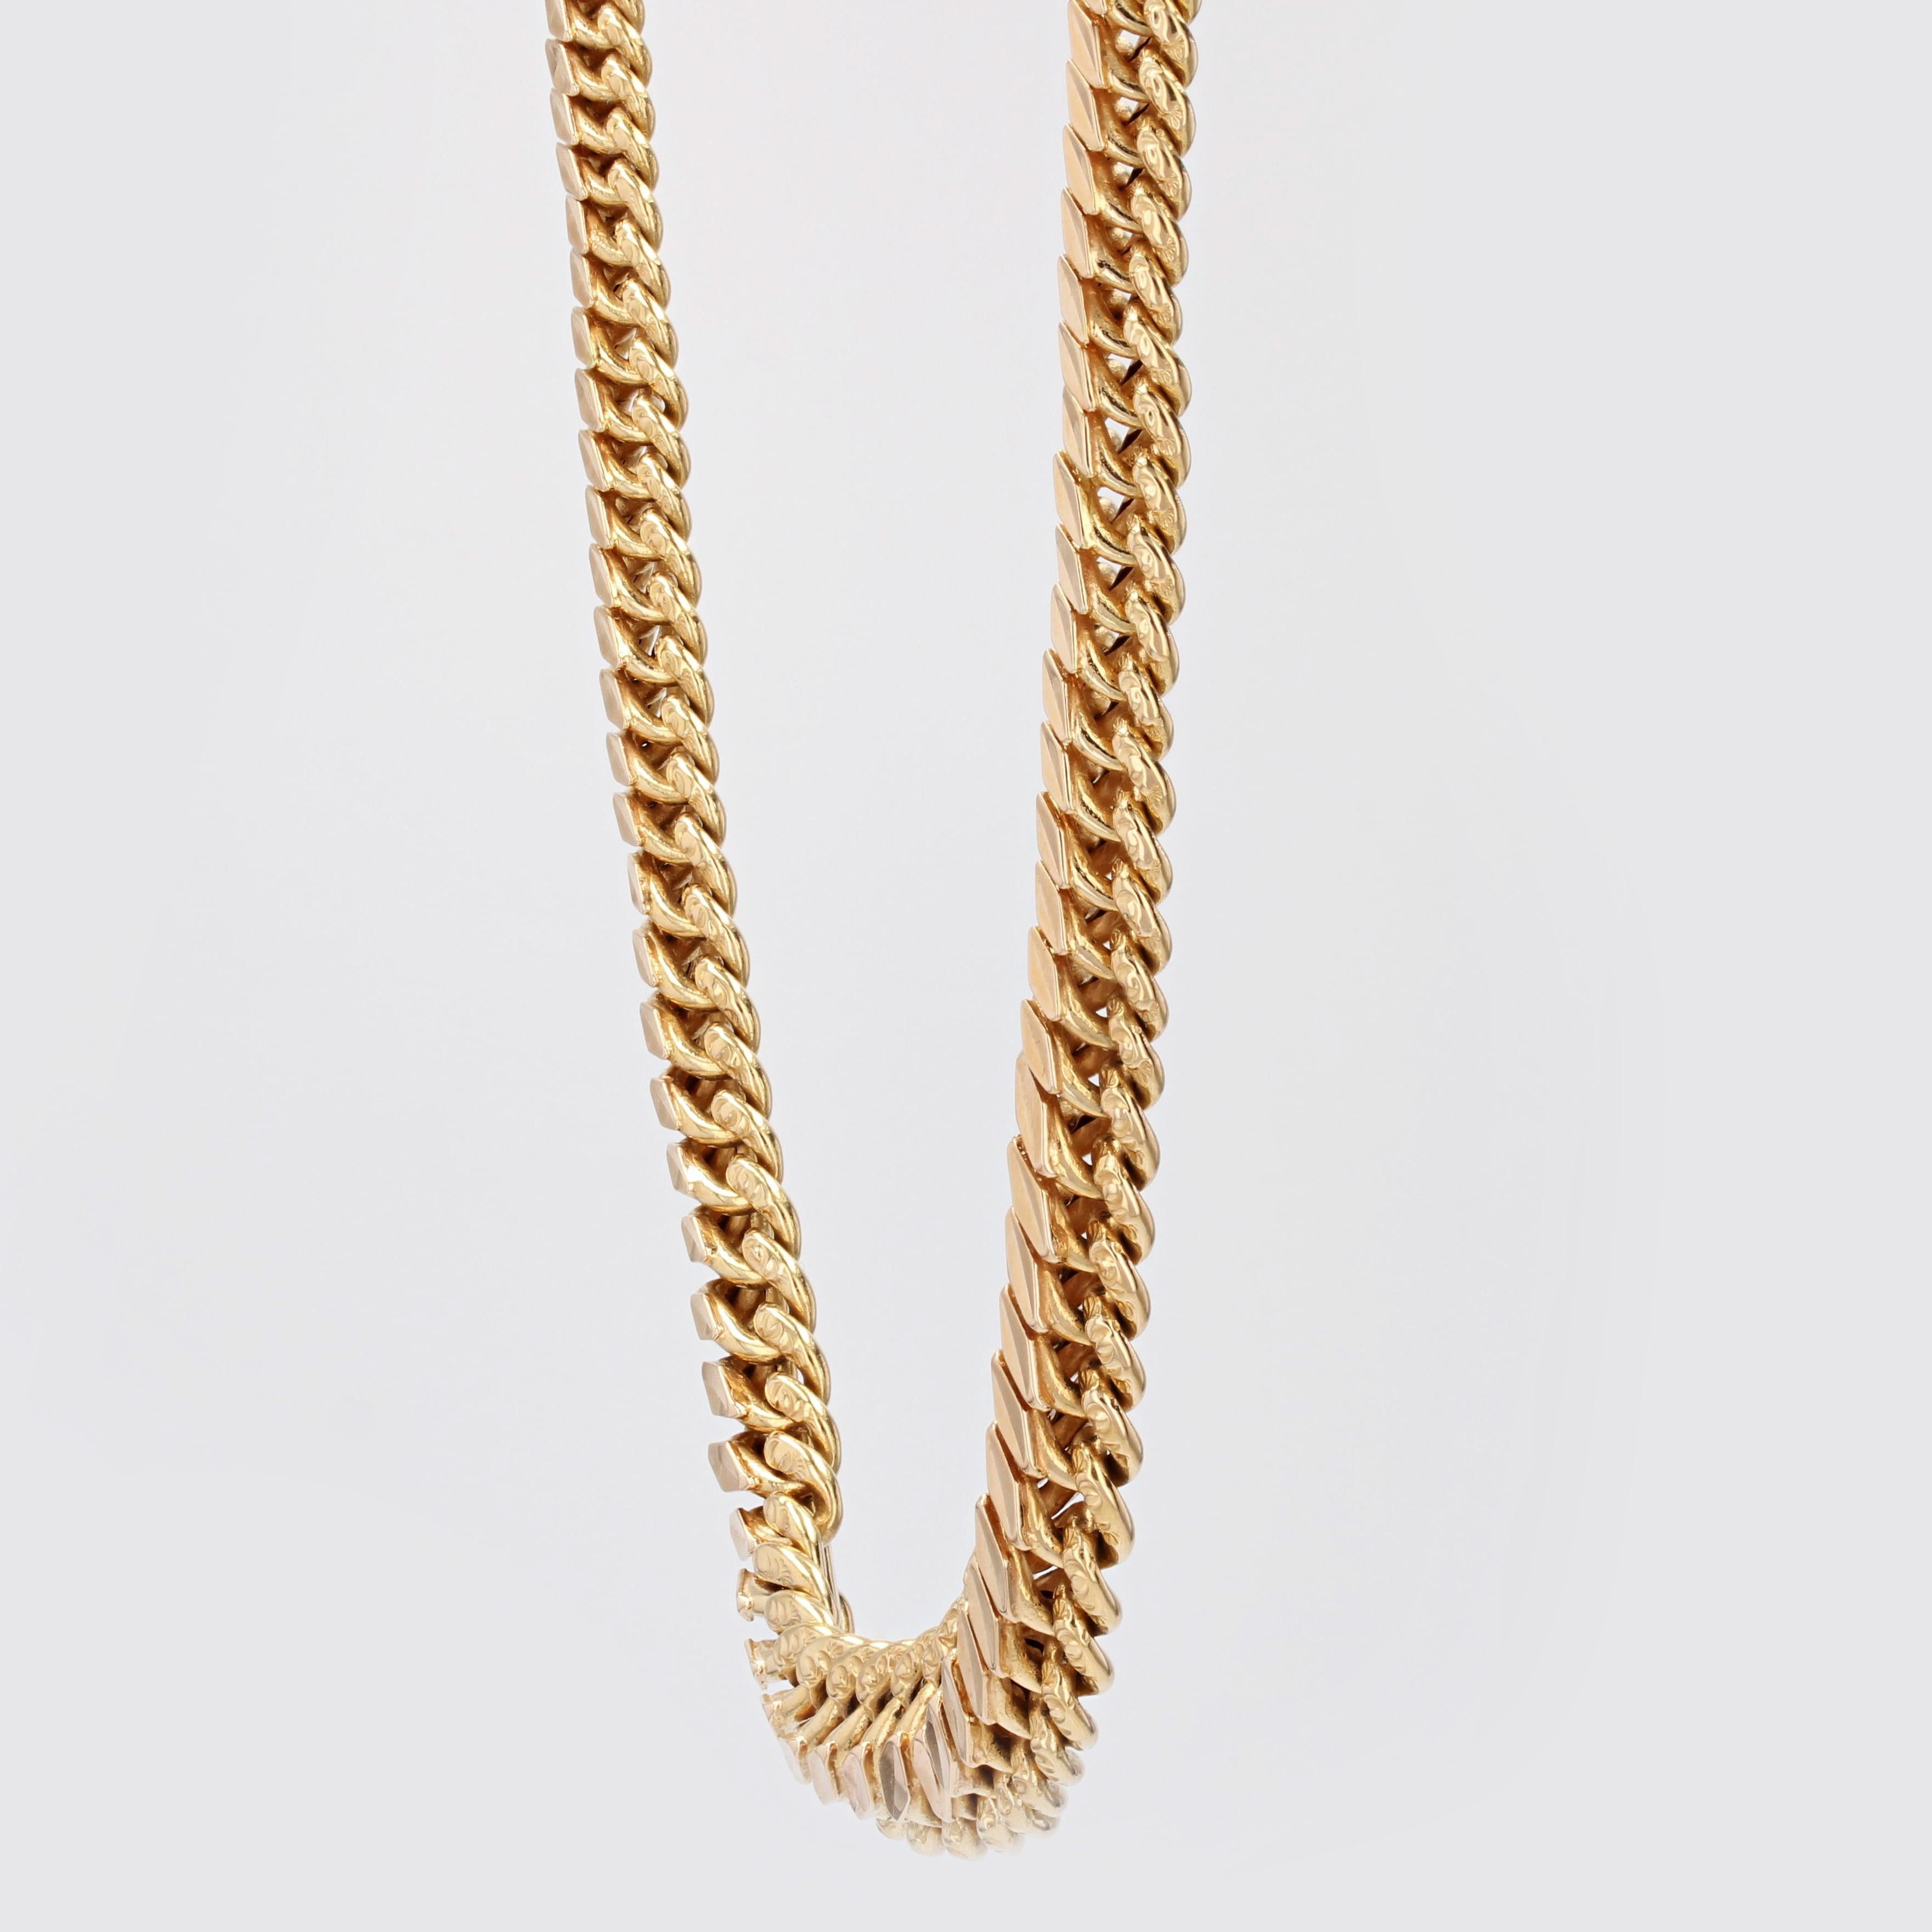 French 1960s 18 Karat Yellow Gold Retro Curb Chain Necklace For Sale 7